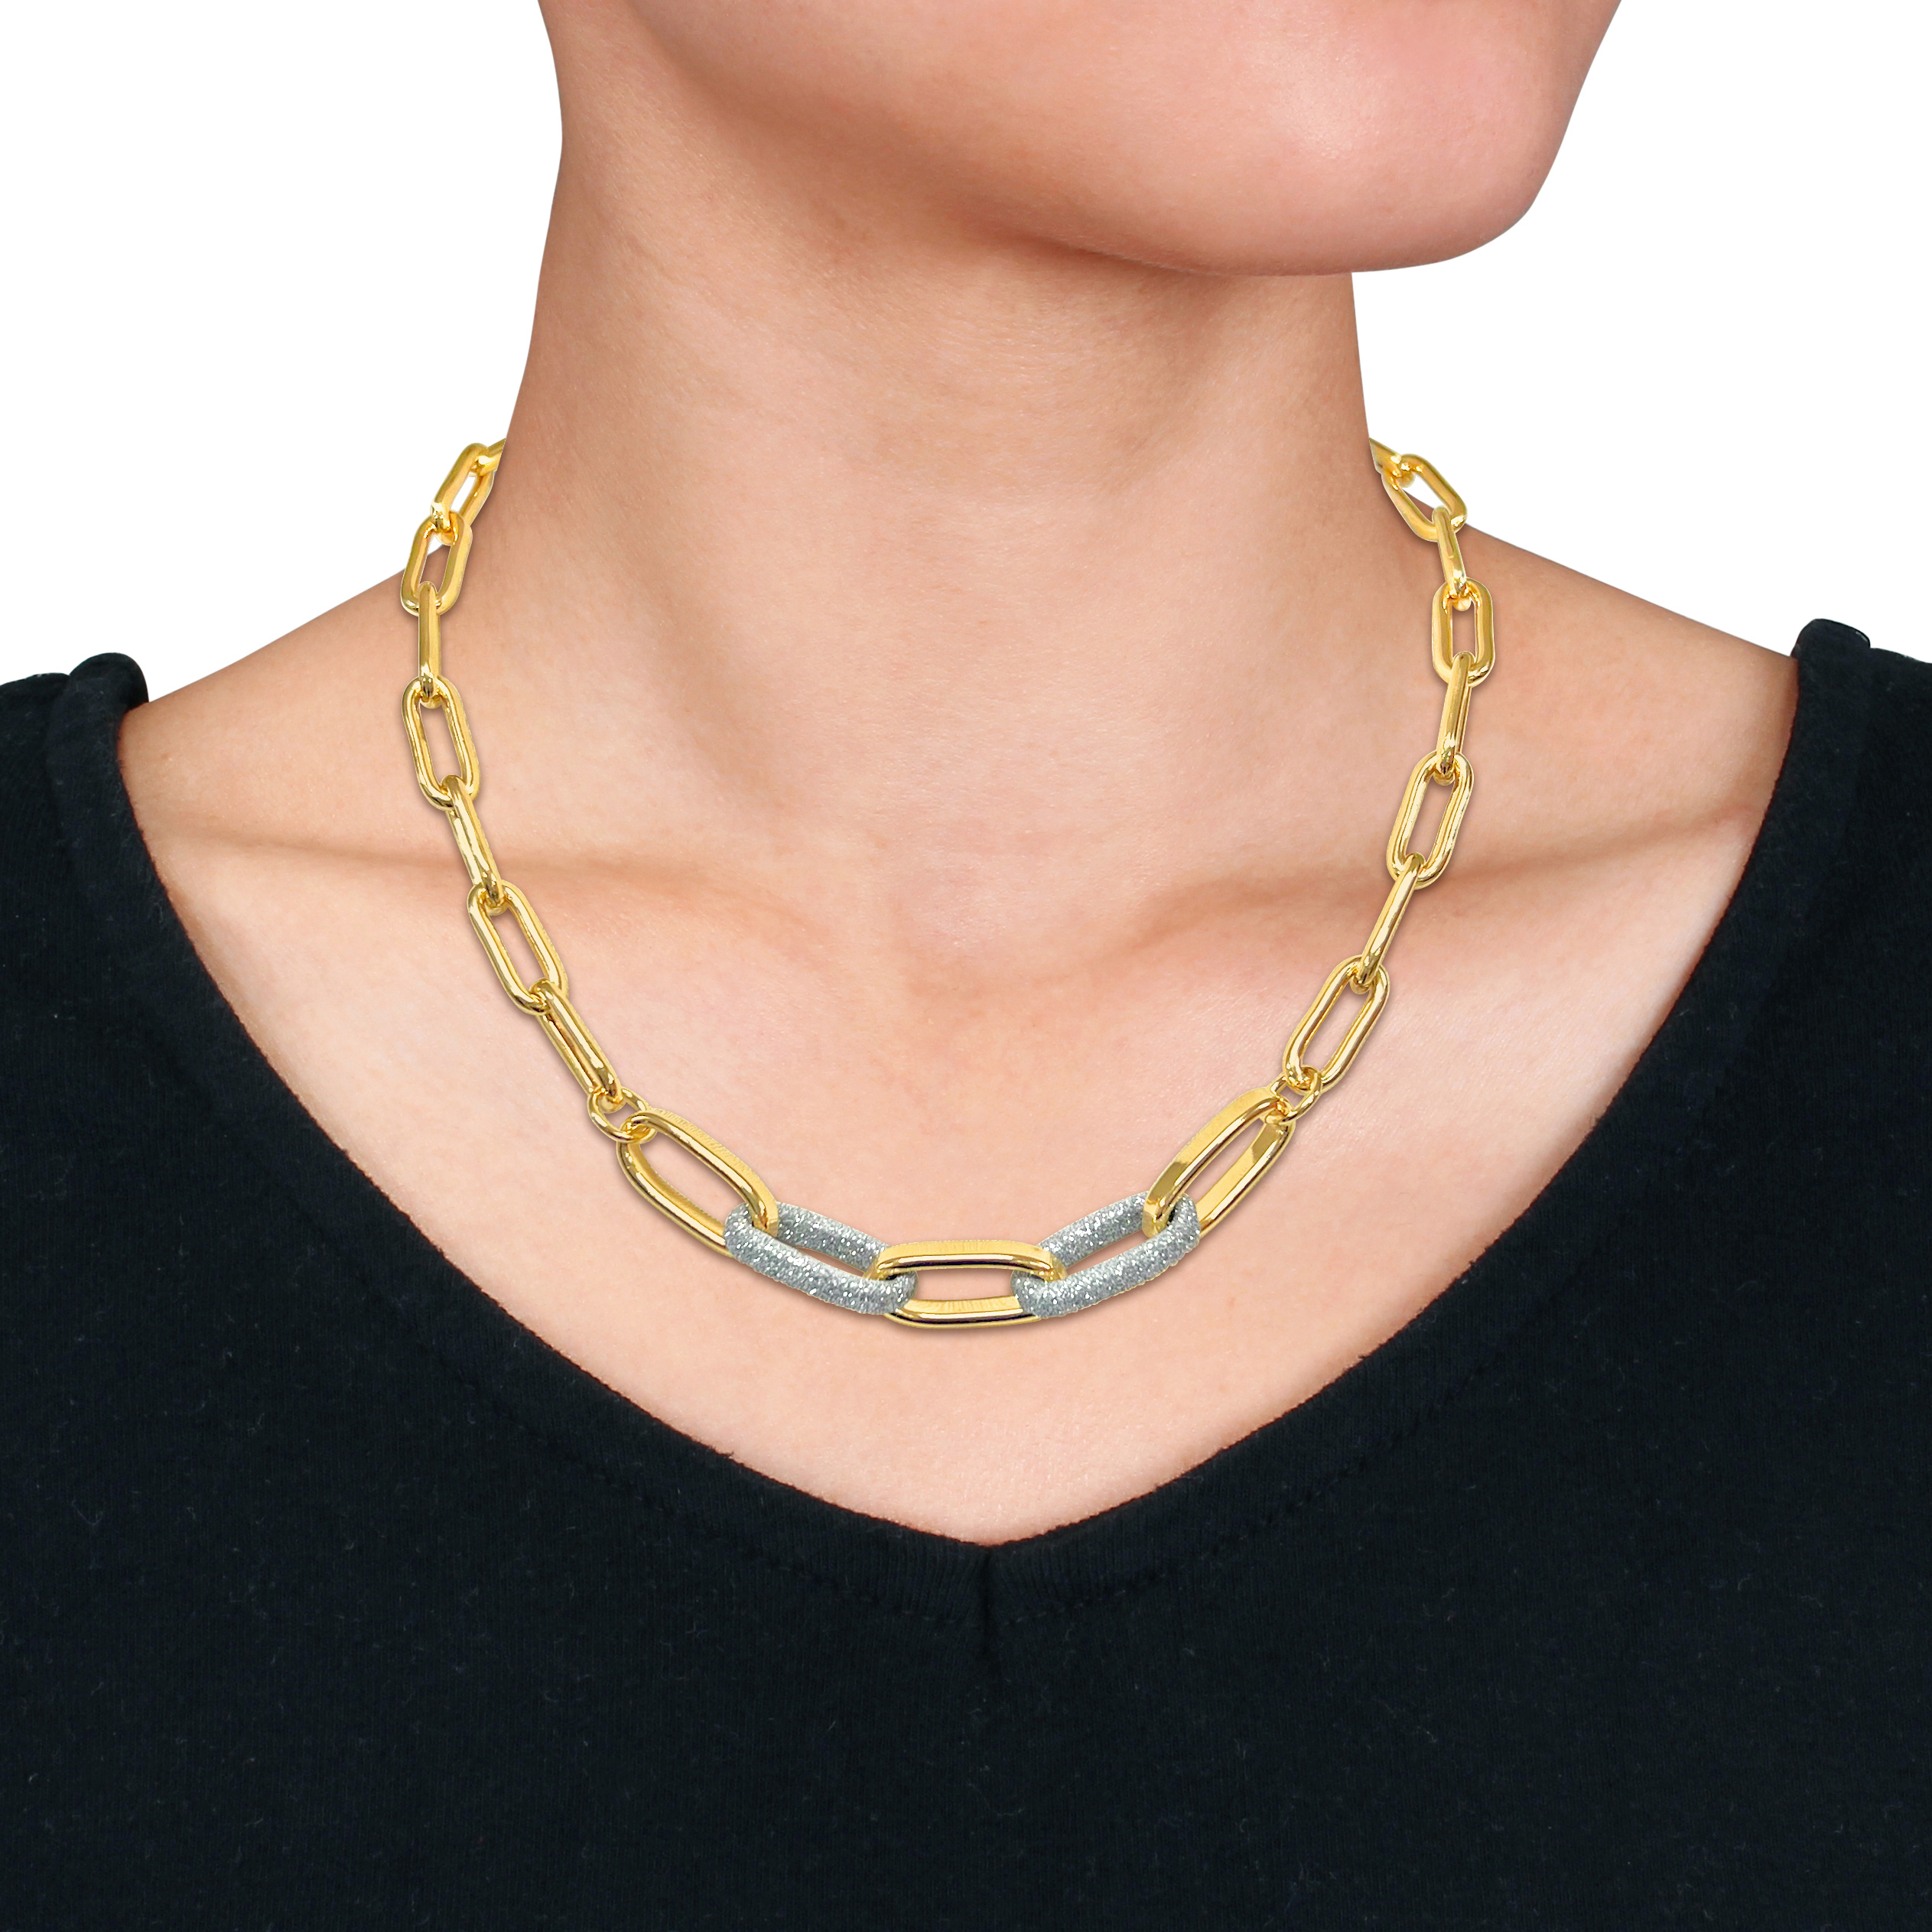 Oval Link Necklace w/ White Sparkle Enamel & Lobster Clasp in Yellow Silver - 17.5+1.5 in.